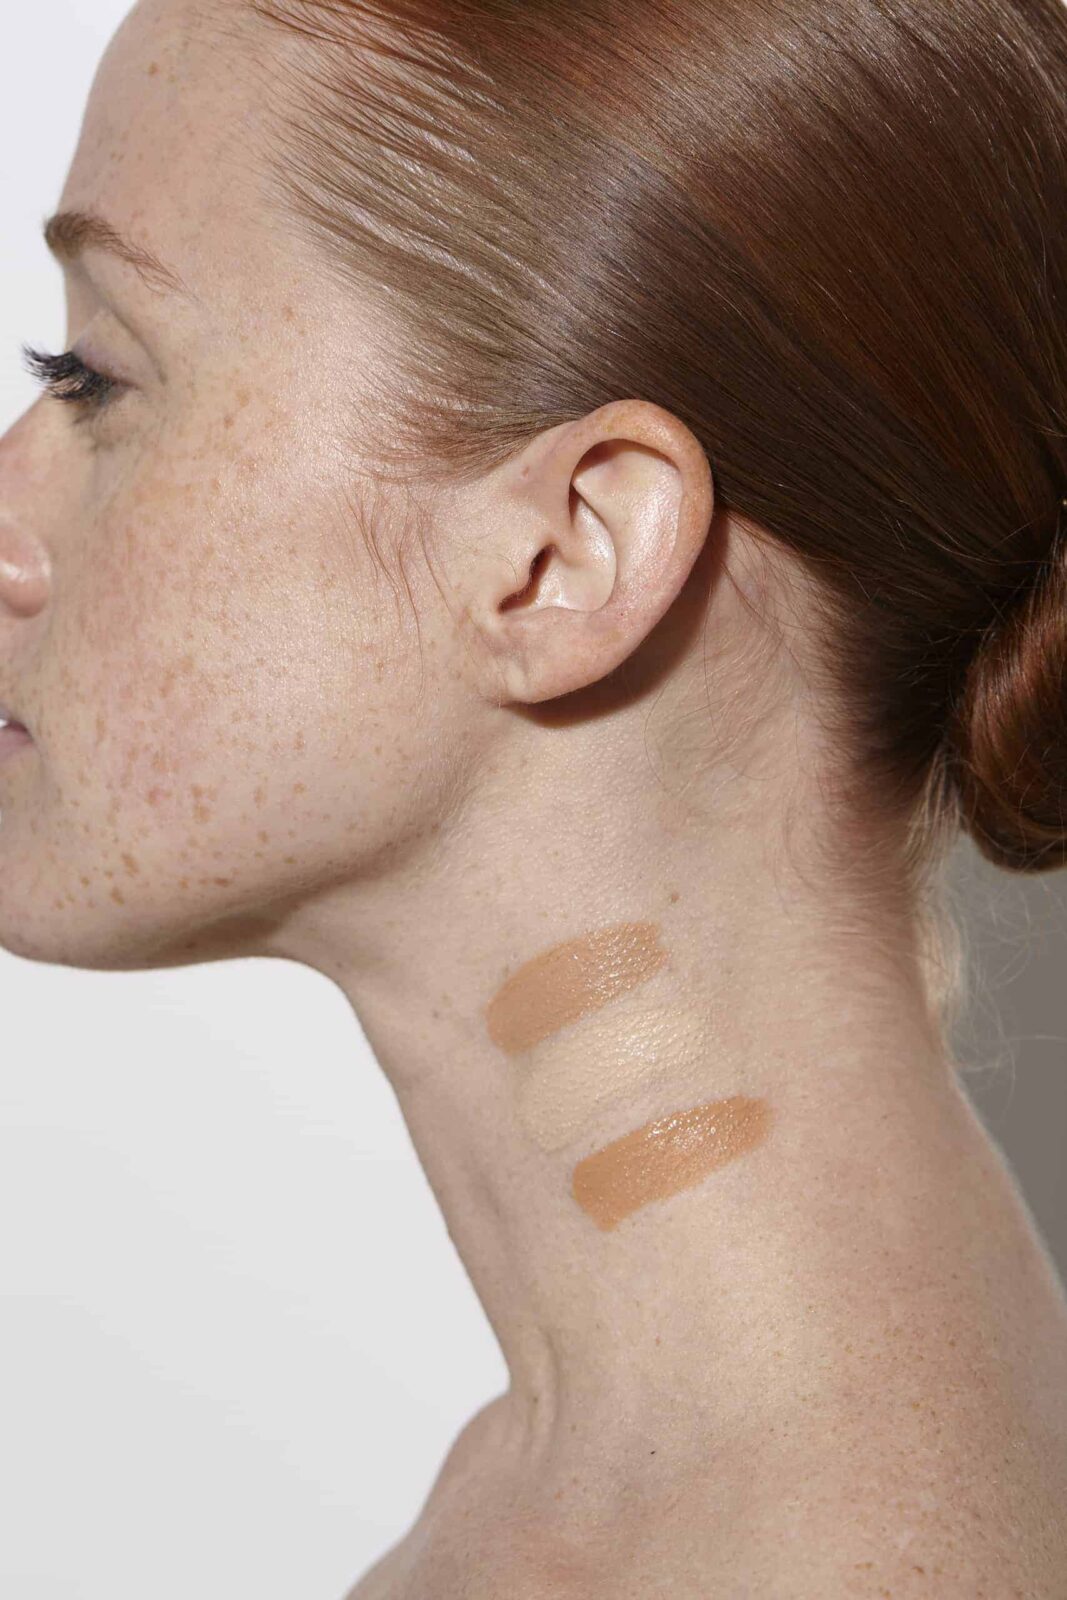 5 of The Best Redhead-Approved Foundations For The No-Makeup Look